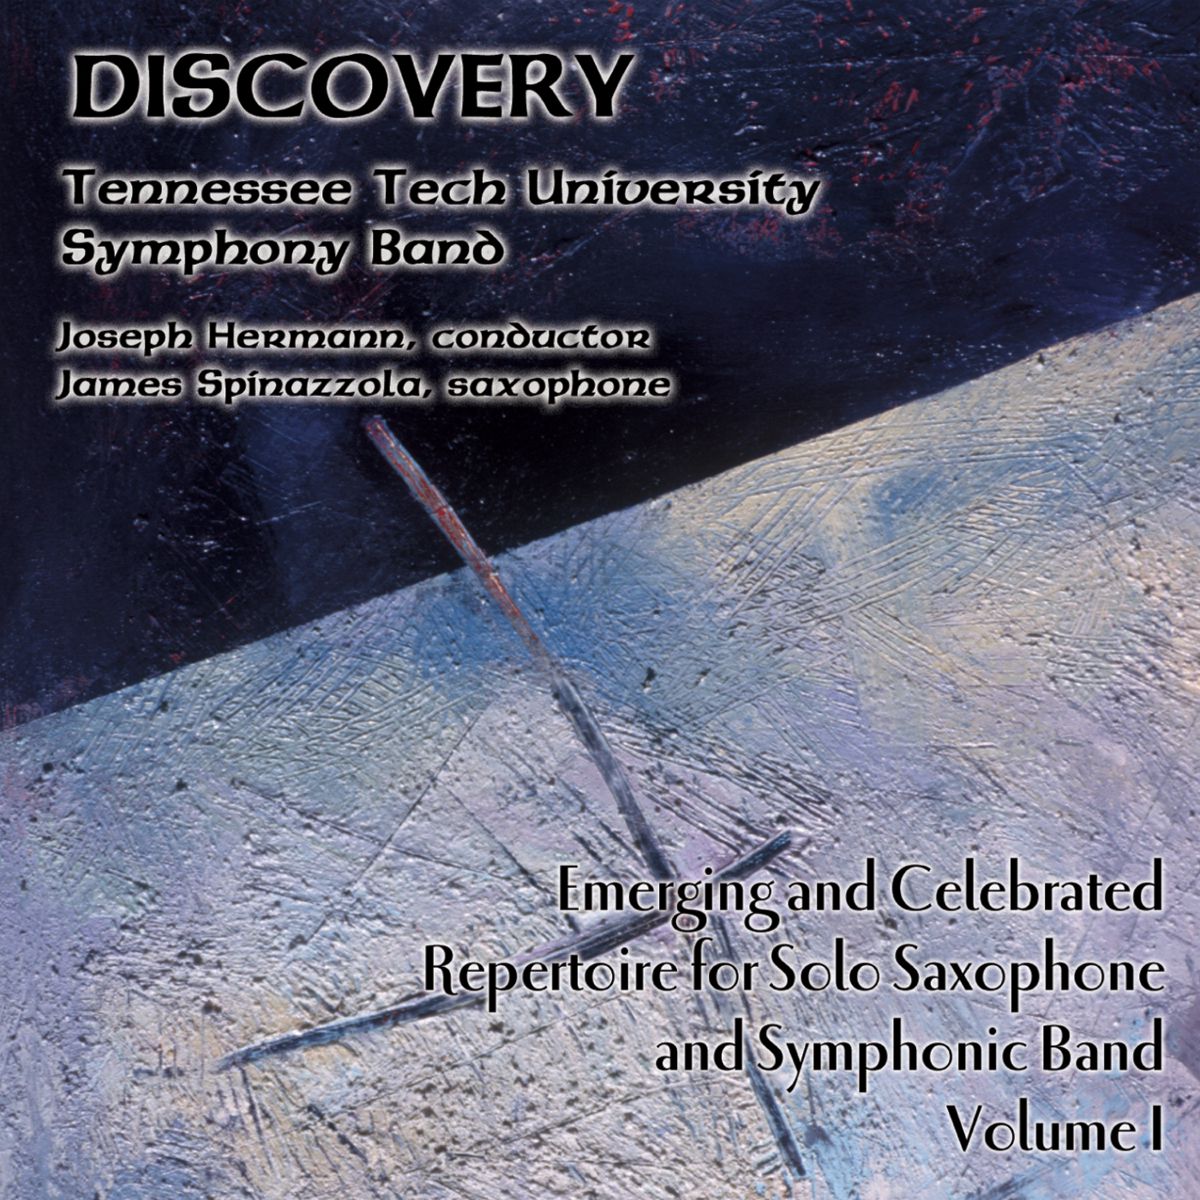 Discovery: Emerging and Celebrated Repertoire for Saxophone and Symphonic Band #1 - hacer clic aqu